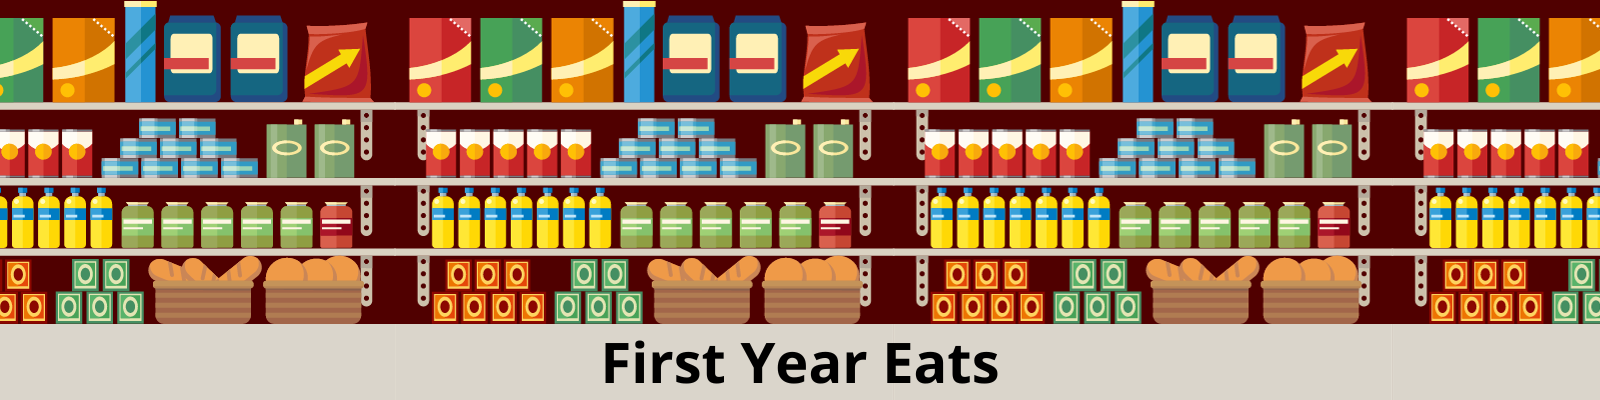 First Year Easts graphic depicting a pantry filled with food and cooking supplies. :First Year Eats" is written in a banner below the graphic.